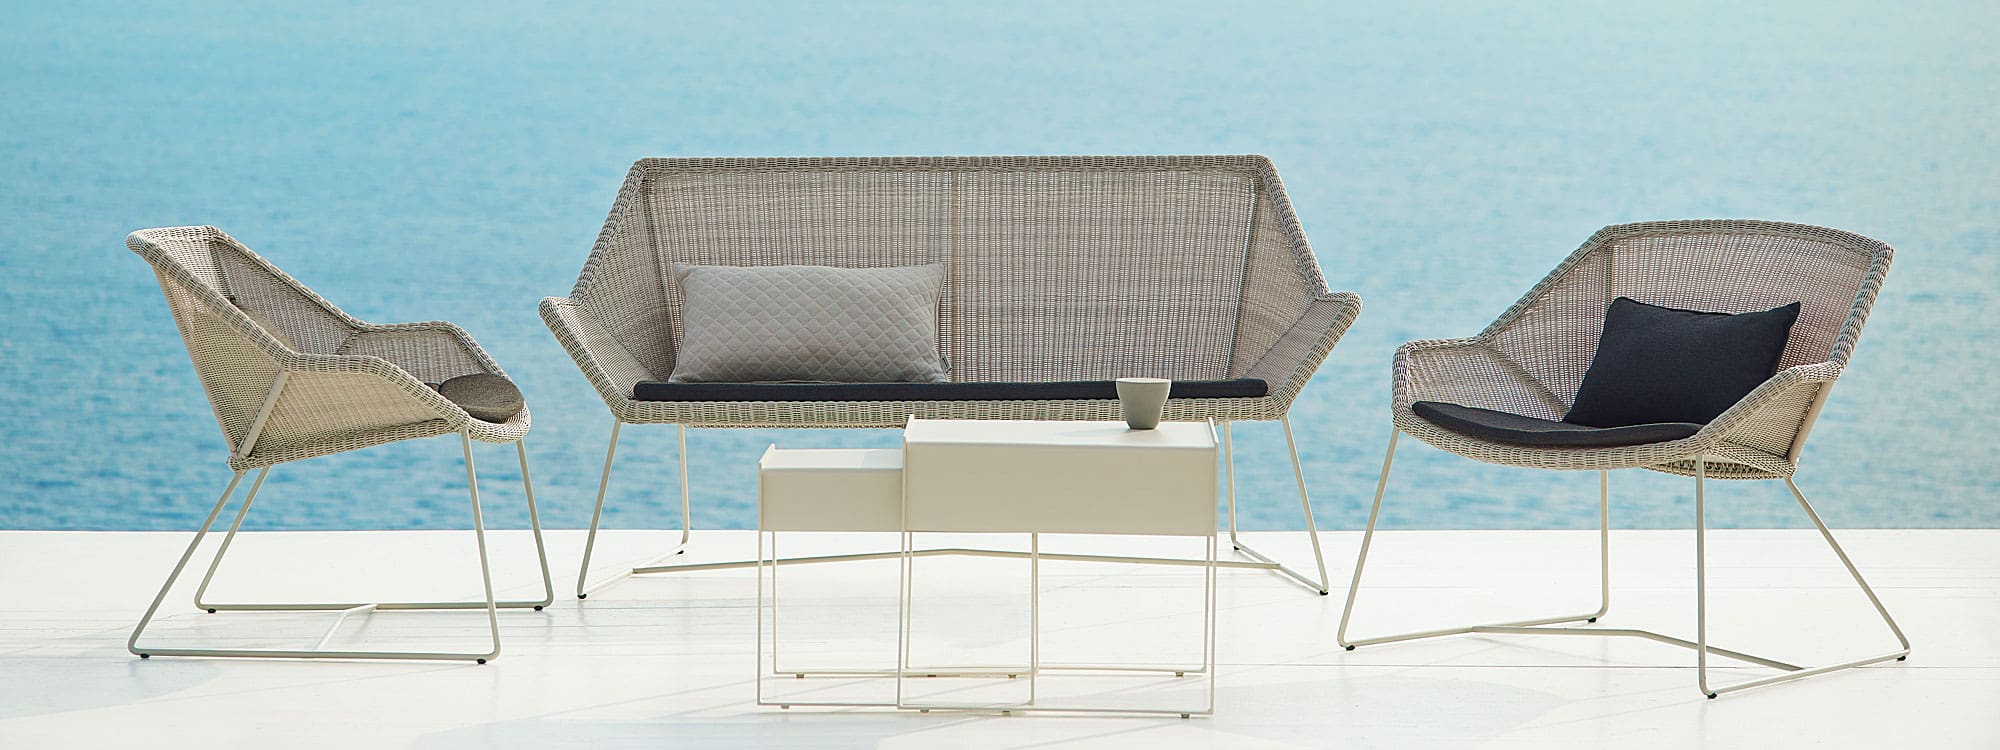 Image of white-grey Breeze 2 seat garden sofa and outdoor rattan lounge chairs by Cane-line, with sea in background